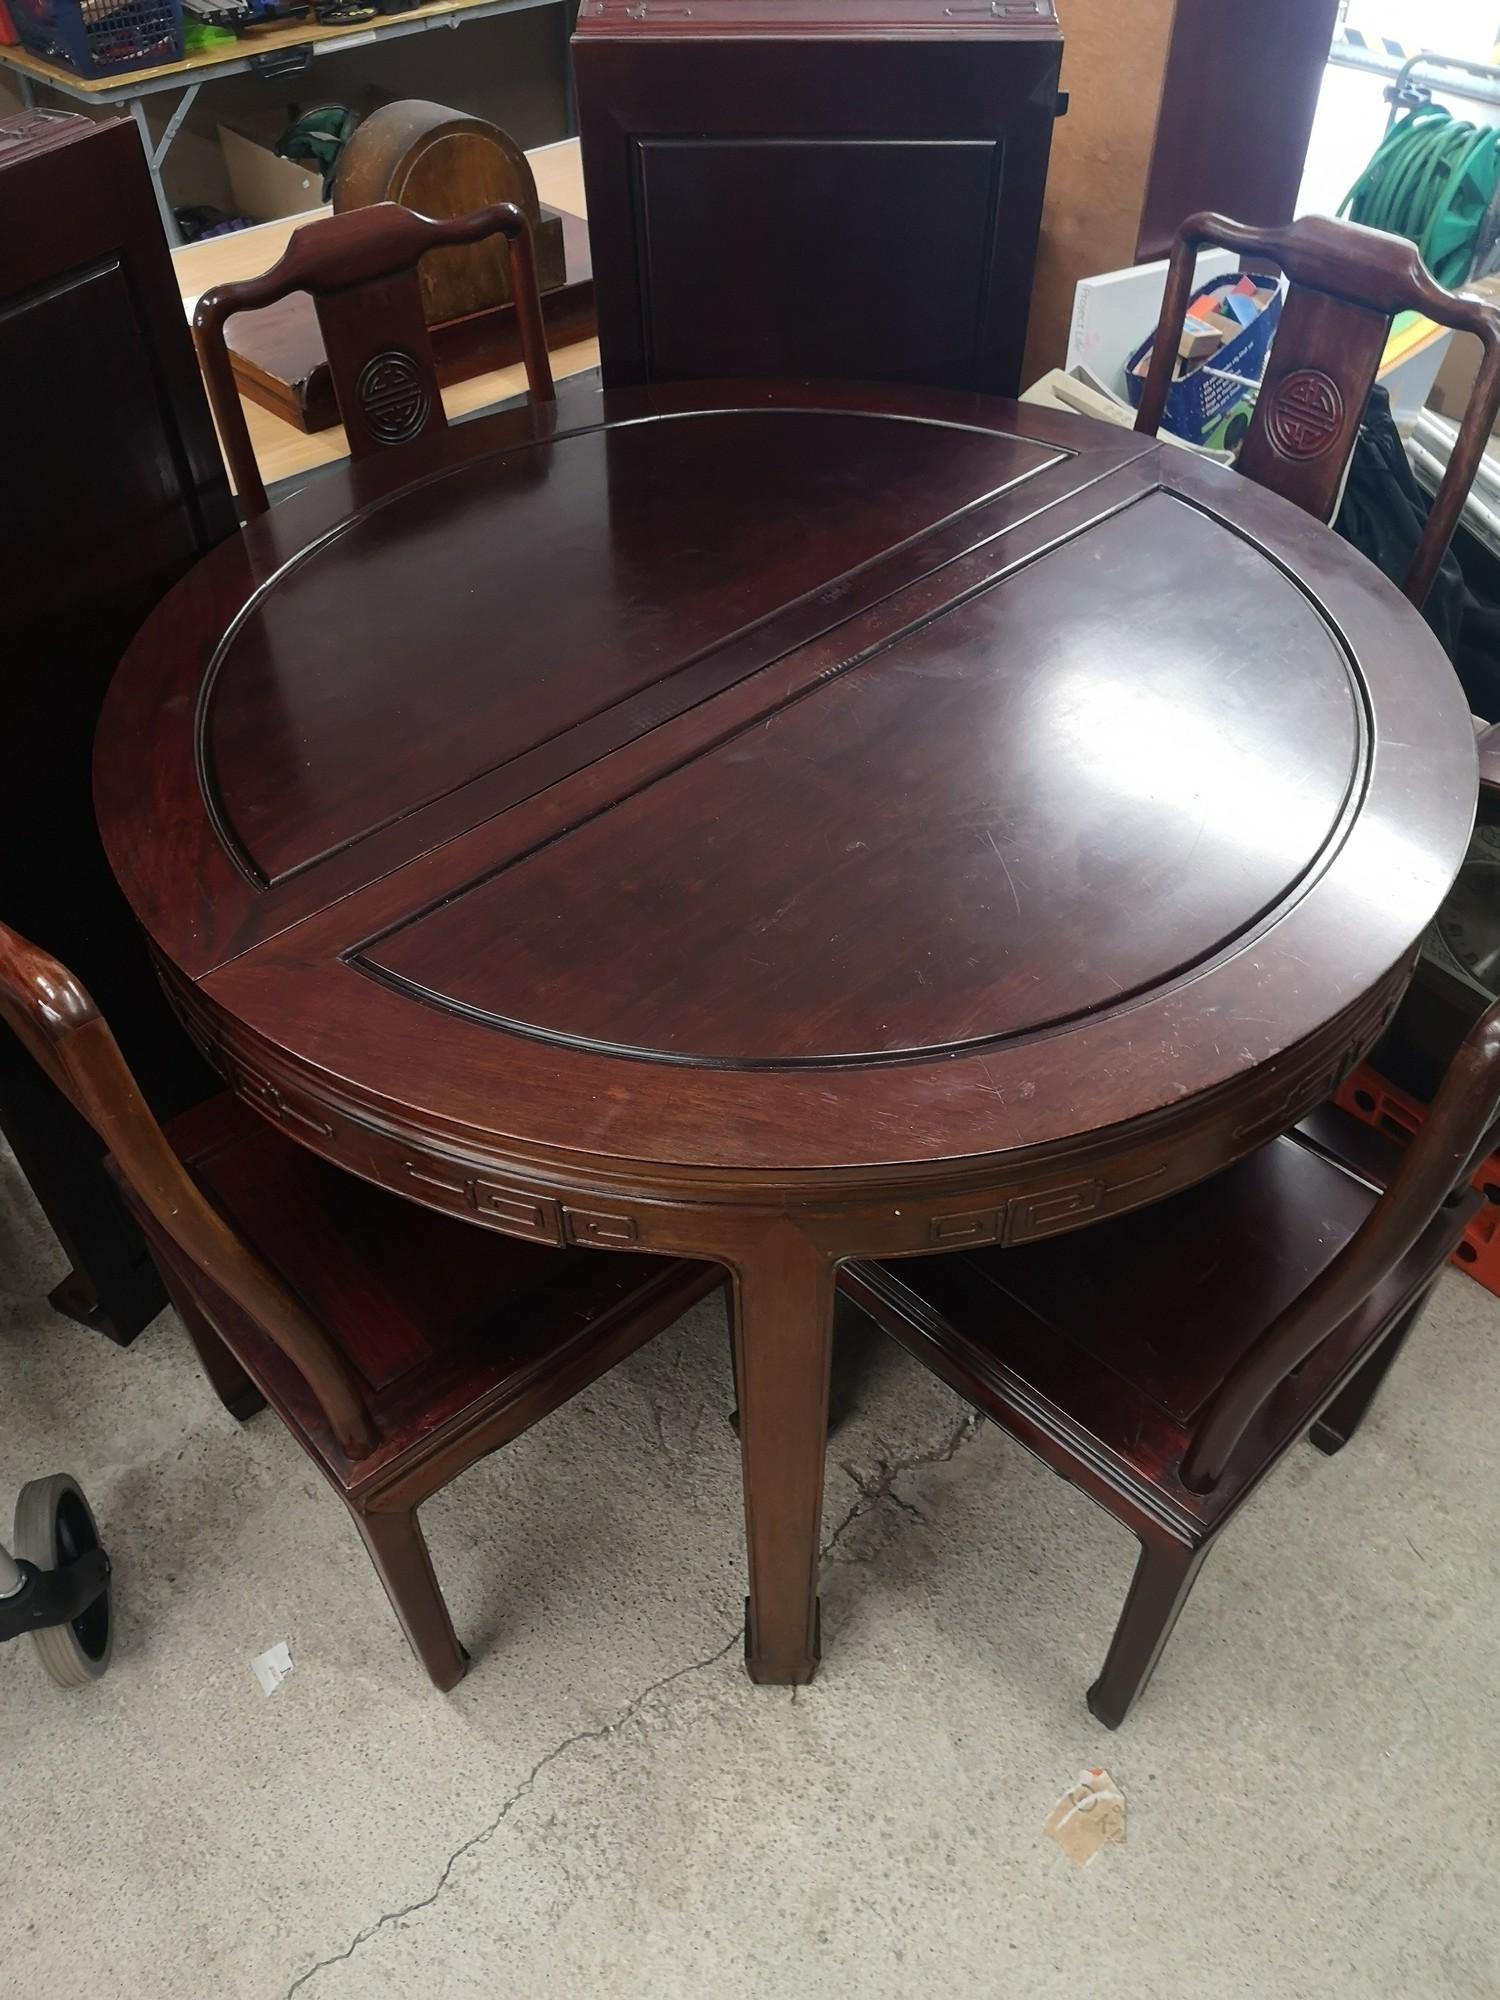 Chinese table with 4 chairs and two extending leafs. - Image 2 of 2